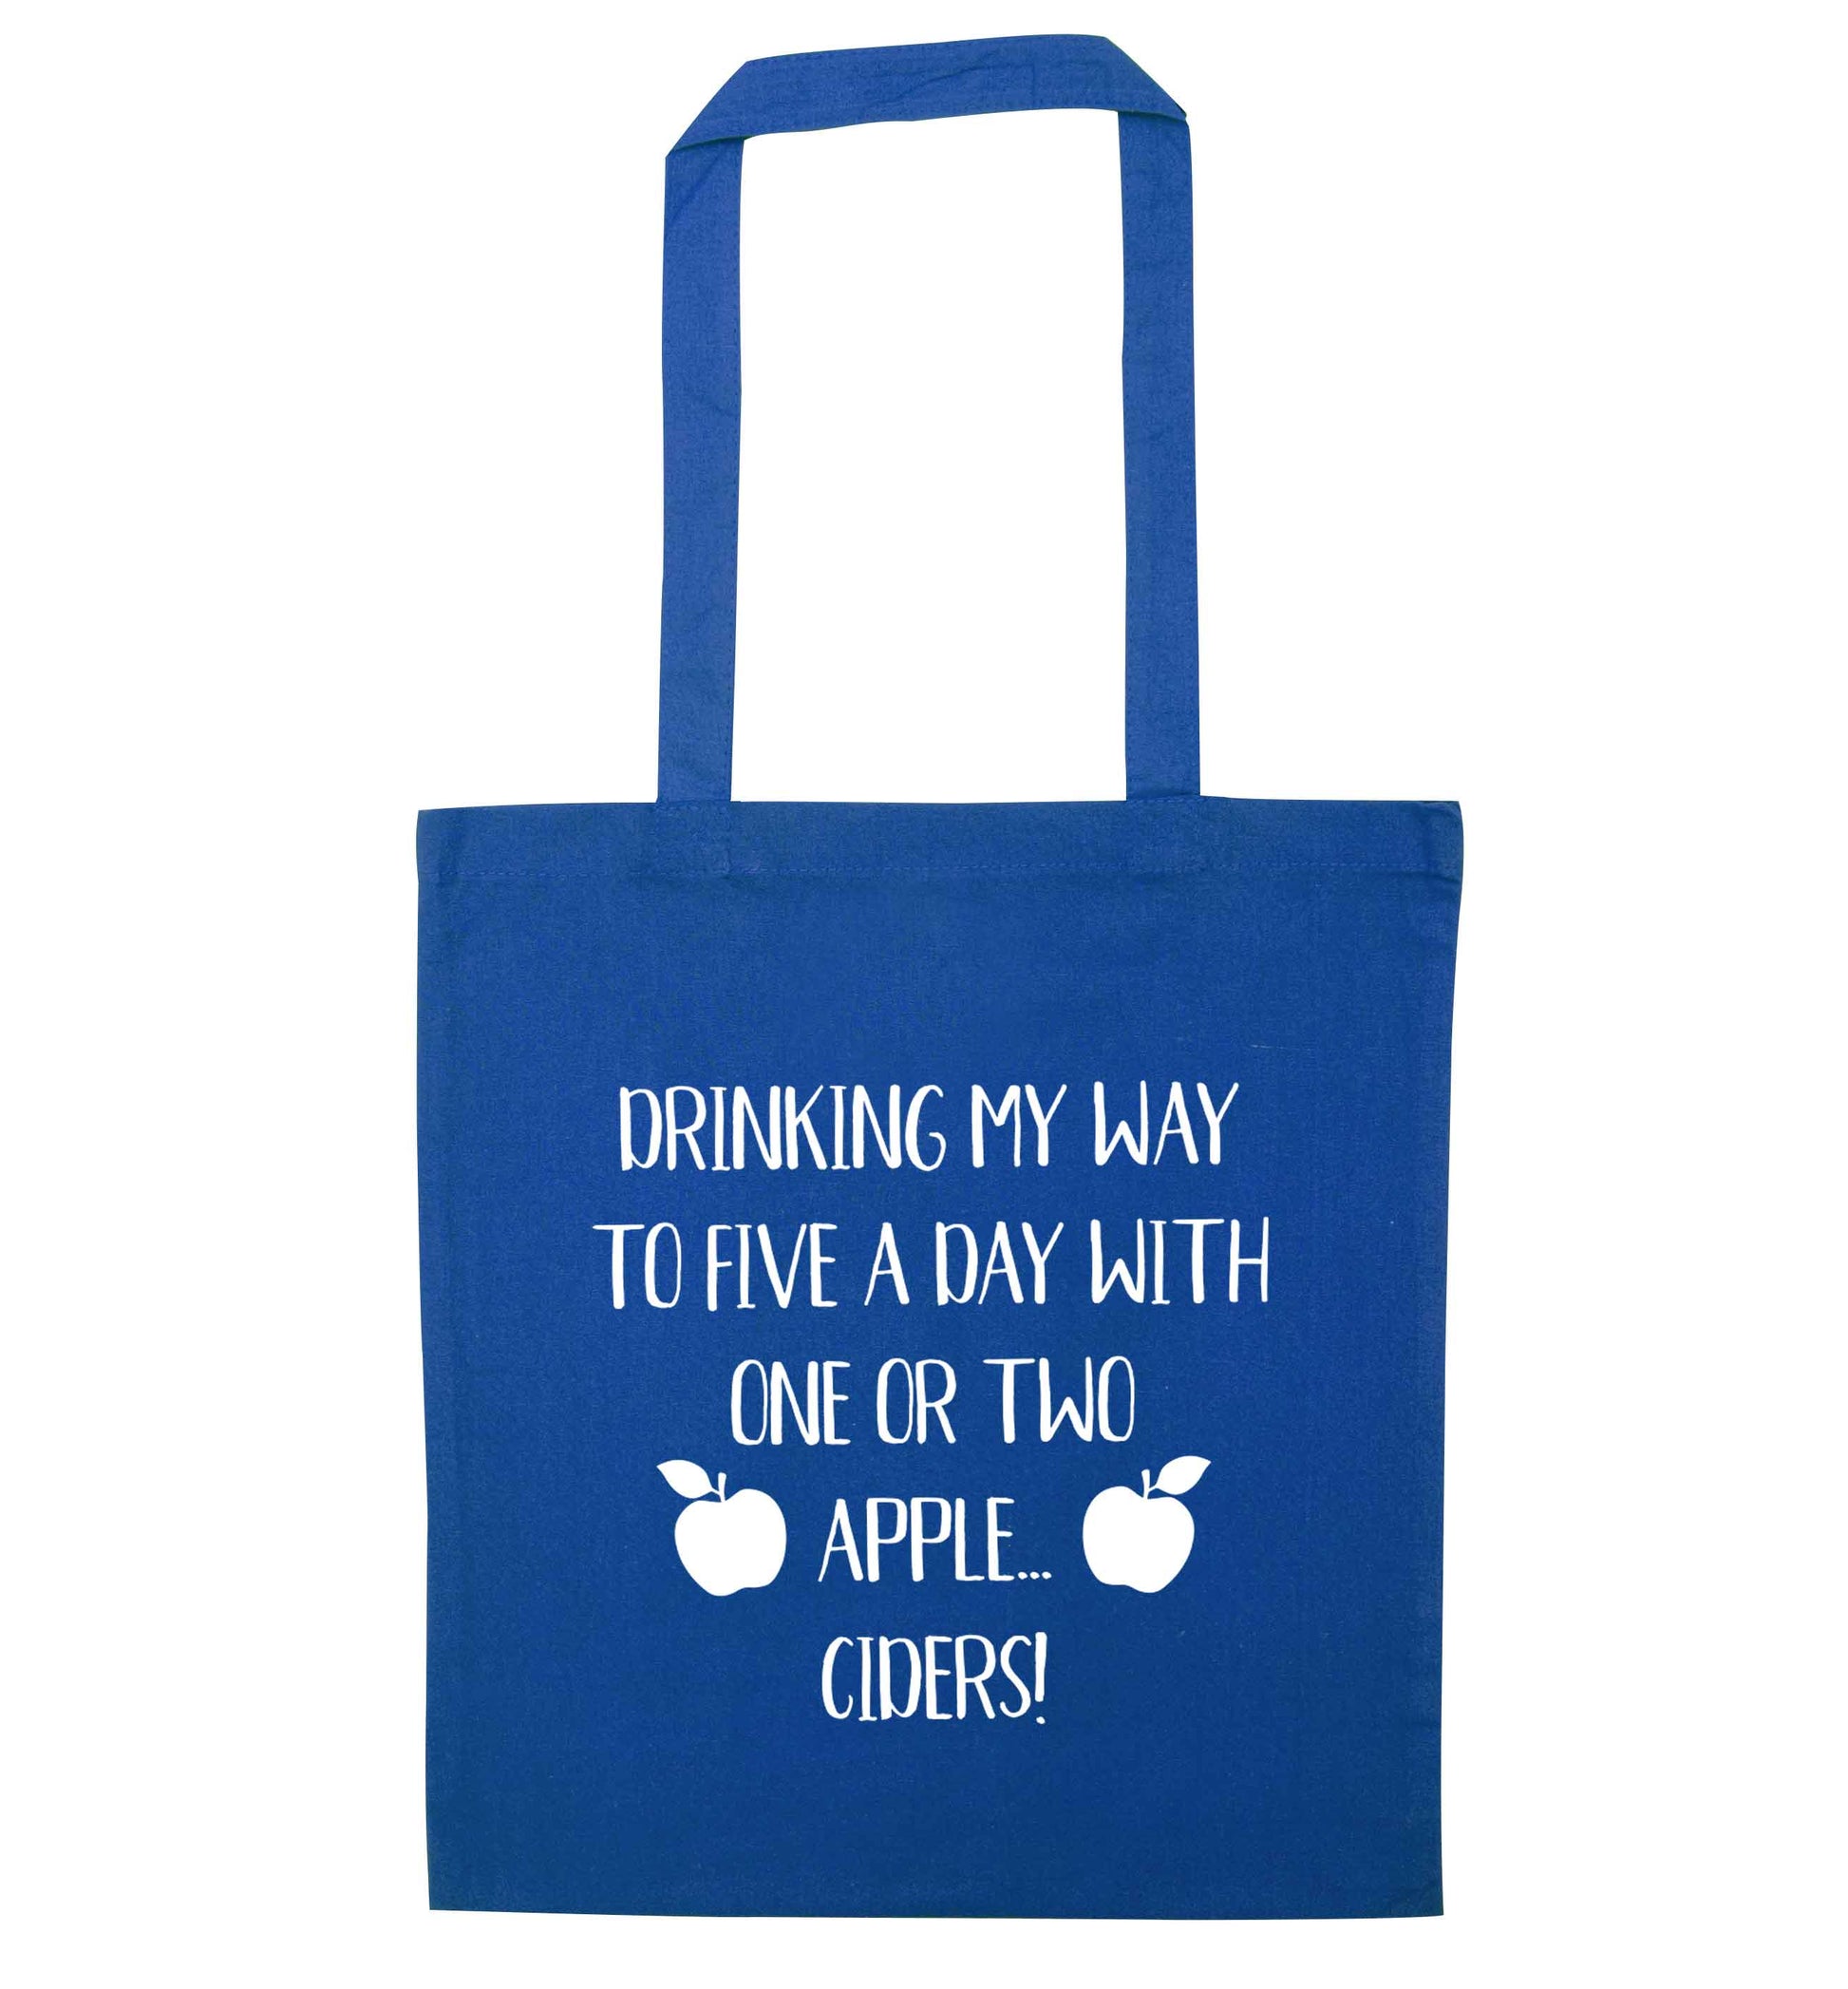 Drinking my way to five a day with one or two apple ciders blue tote bag